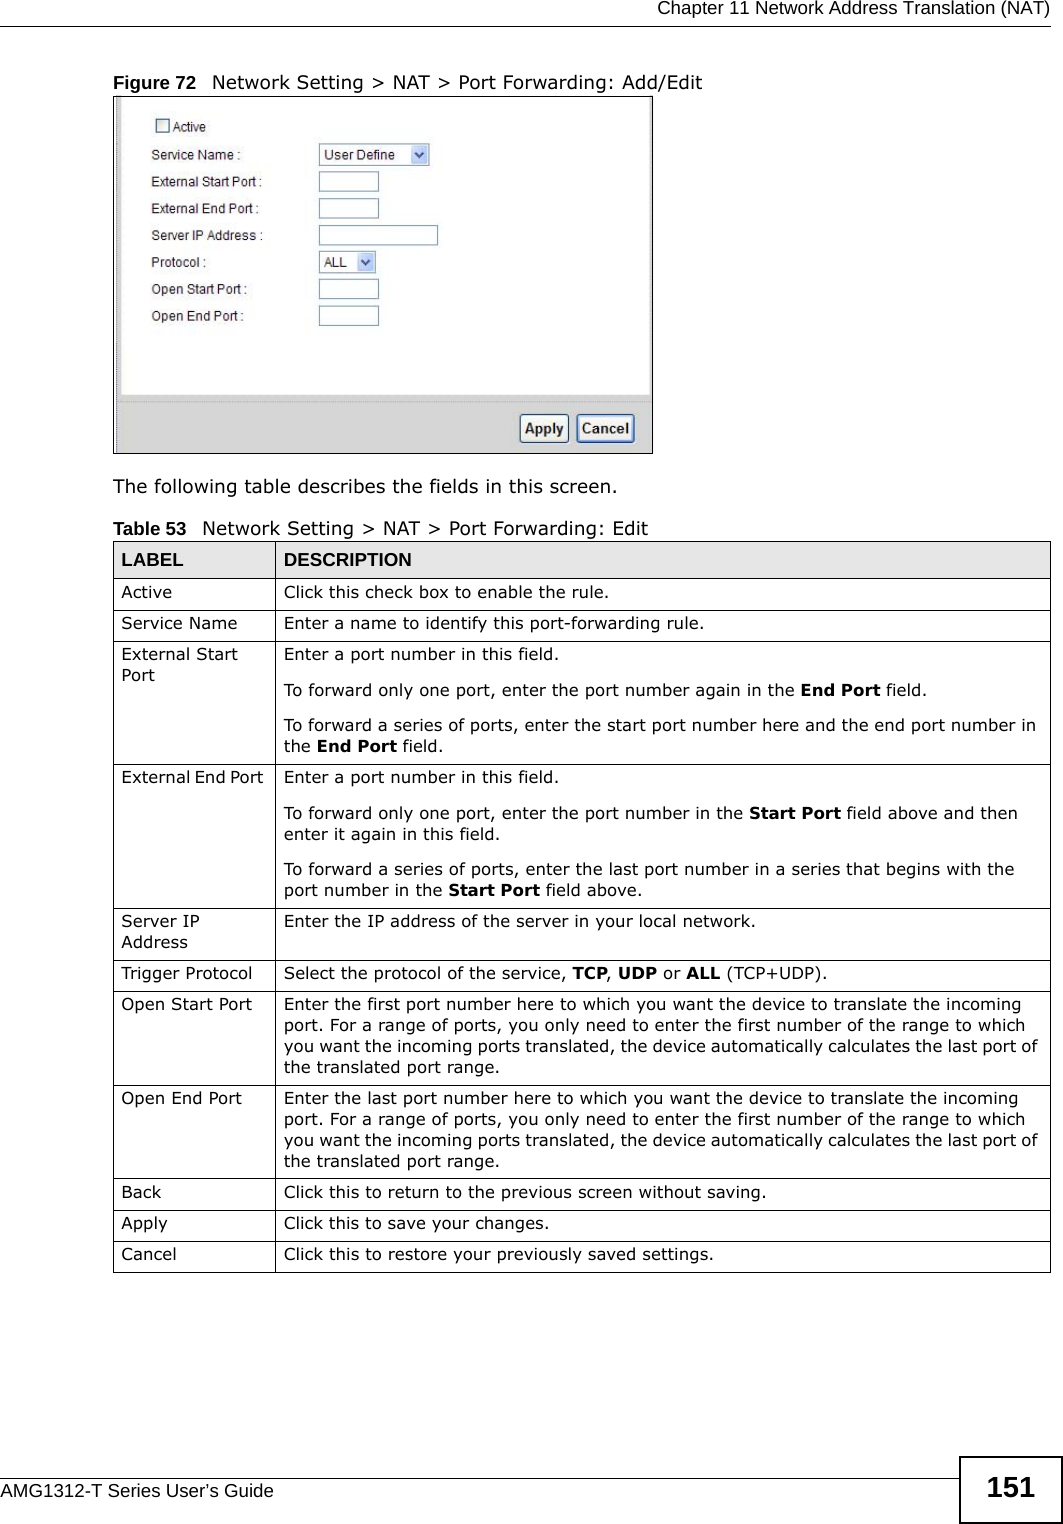  Chapter 11 Network Address Translation (NAT)AMG1312-T Series User’s Guide 151Figure 72   Network Setting &gt; NAT &gt; Port Forwarding: Add/Edit The following table describes the fields in this screen. Table 53   Network Setting &gt; NAT &gt; Port Forwarding: Edit LABEL DESCRIPTIONActive Click this check box to enable the rule.Service Name Enter a name to identify this port-forwarding rule.External Start Port Enter a port number in this field. To forward only one port, enter the port number again in the End Port field. To forward a series of ports, enter the start port number here and the end port number in the End Port field.External End Port  Enter a port number in this field. To forward only one port, enter the port number in the Start Port field above and then enter it again in this field. To forward a series of ports, enter the last port number in a series that begins with the port number in the Start Port field above.Server IP AddressEnter the IP address of the server in your local network.Trigger Protocol Select the protocol of the service, TCP, UDP or ALL (TCP+UDP).Open Start Port Enter the first port number here to which you want the device to translate the incoming port. For a range of ports, you only need to enter the first number of the range to which you want the incoming ports translated, the device automatically calculates the last port of the translated port range.Open End Port Enter the last port number here to which you want the device to translate the incoming port. For a range of ports, you only need to enter the first number of the range to which you want the incoming ports translated, the device automatically calculates the last port of the translated port range.Back Click this to return to the previous screen without saving.Apply Click this to save your changes.Cancel Click this to restore your previously saved settings.